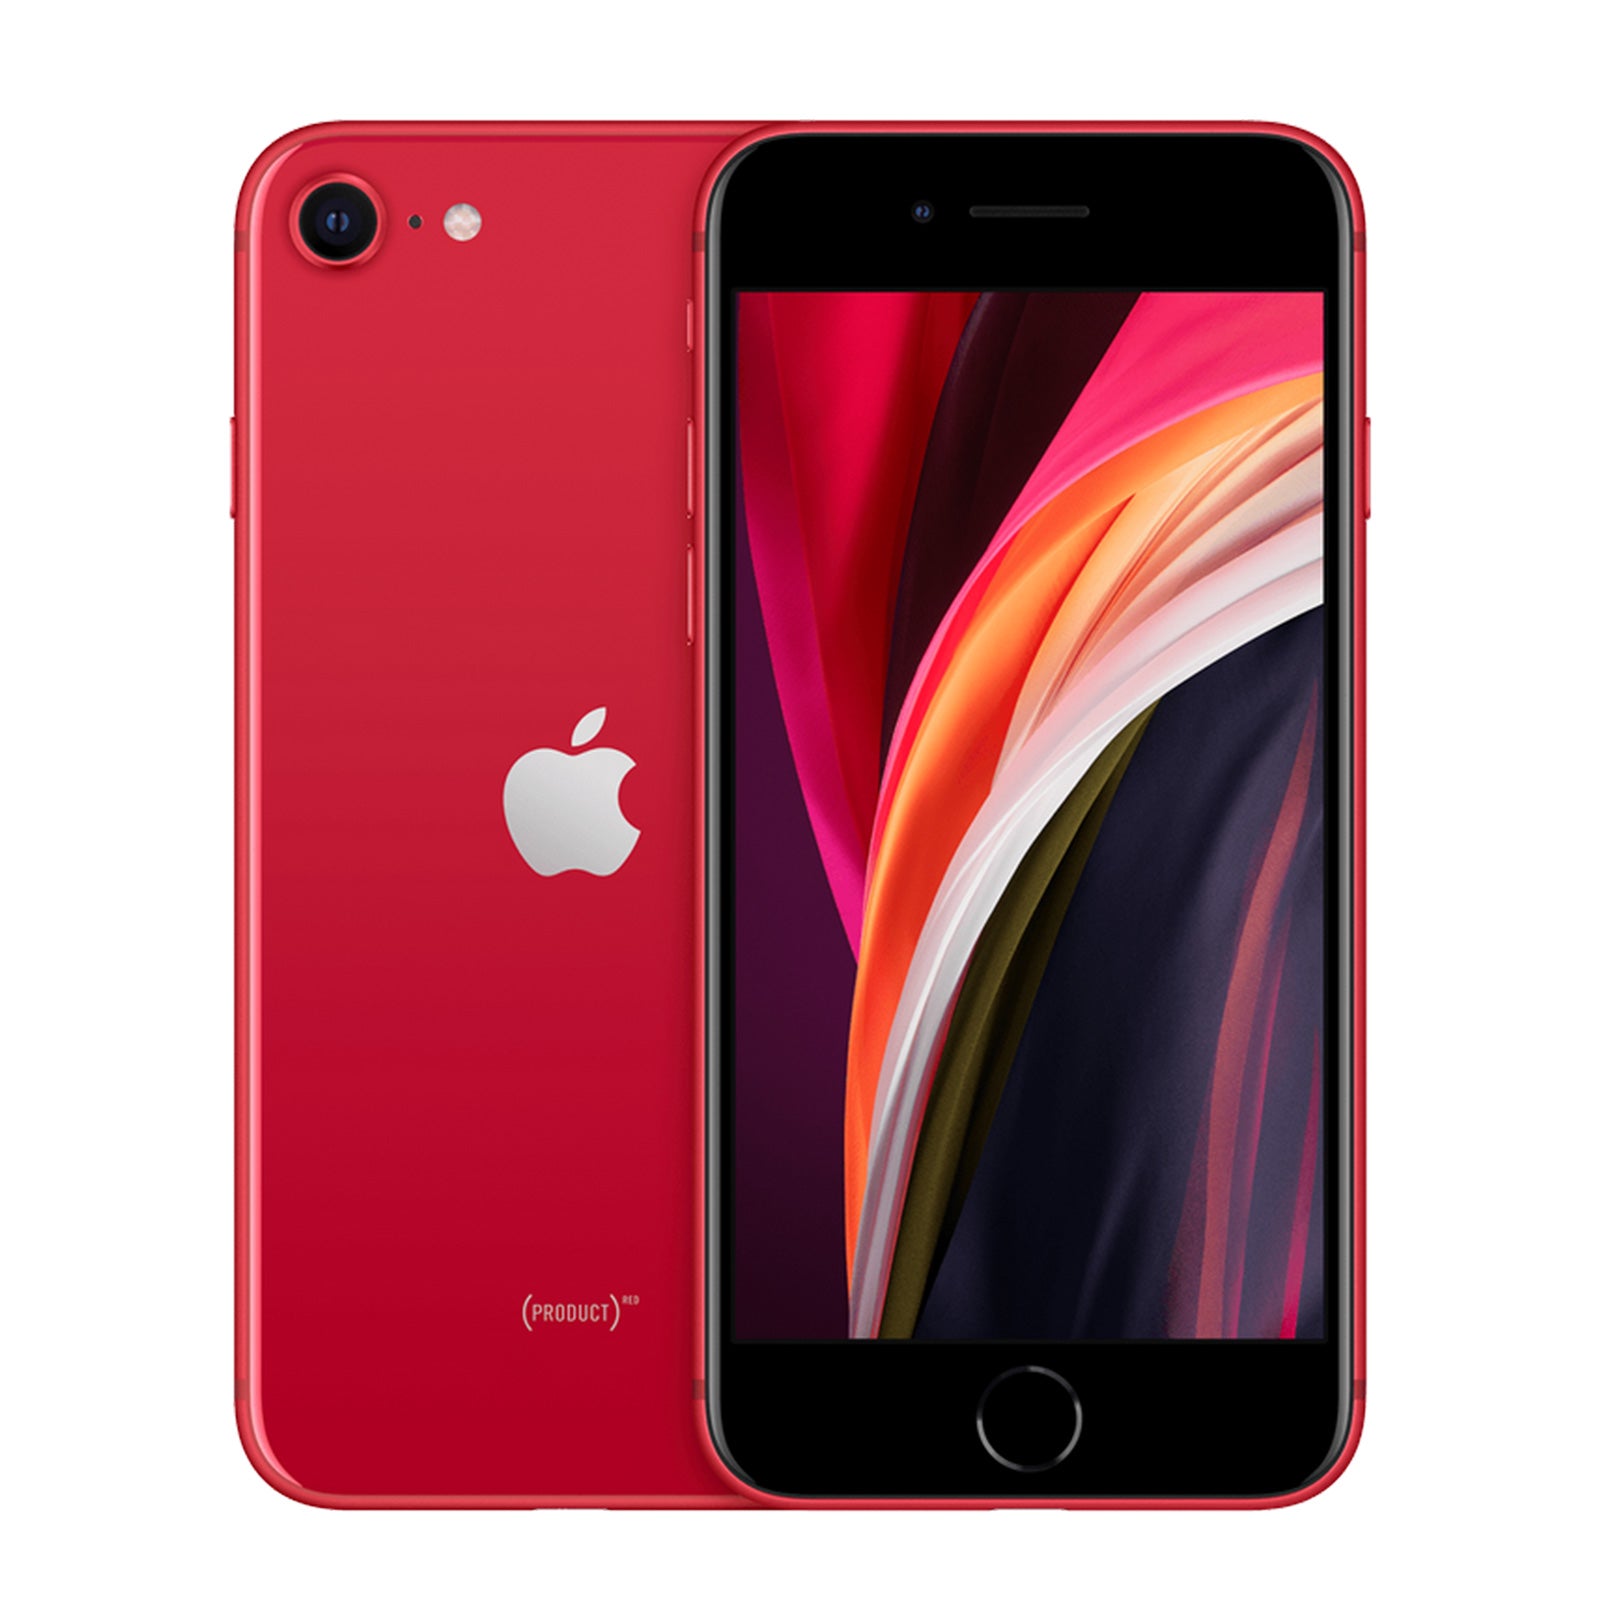 Apple iPhone SE 2nd Gen 64GB Product Red Fair Sprint